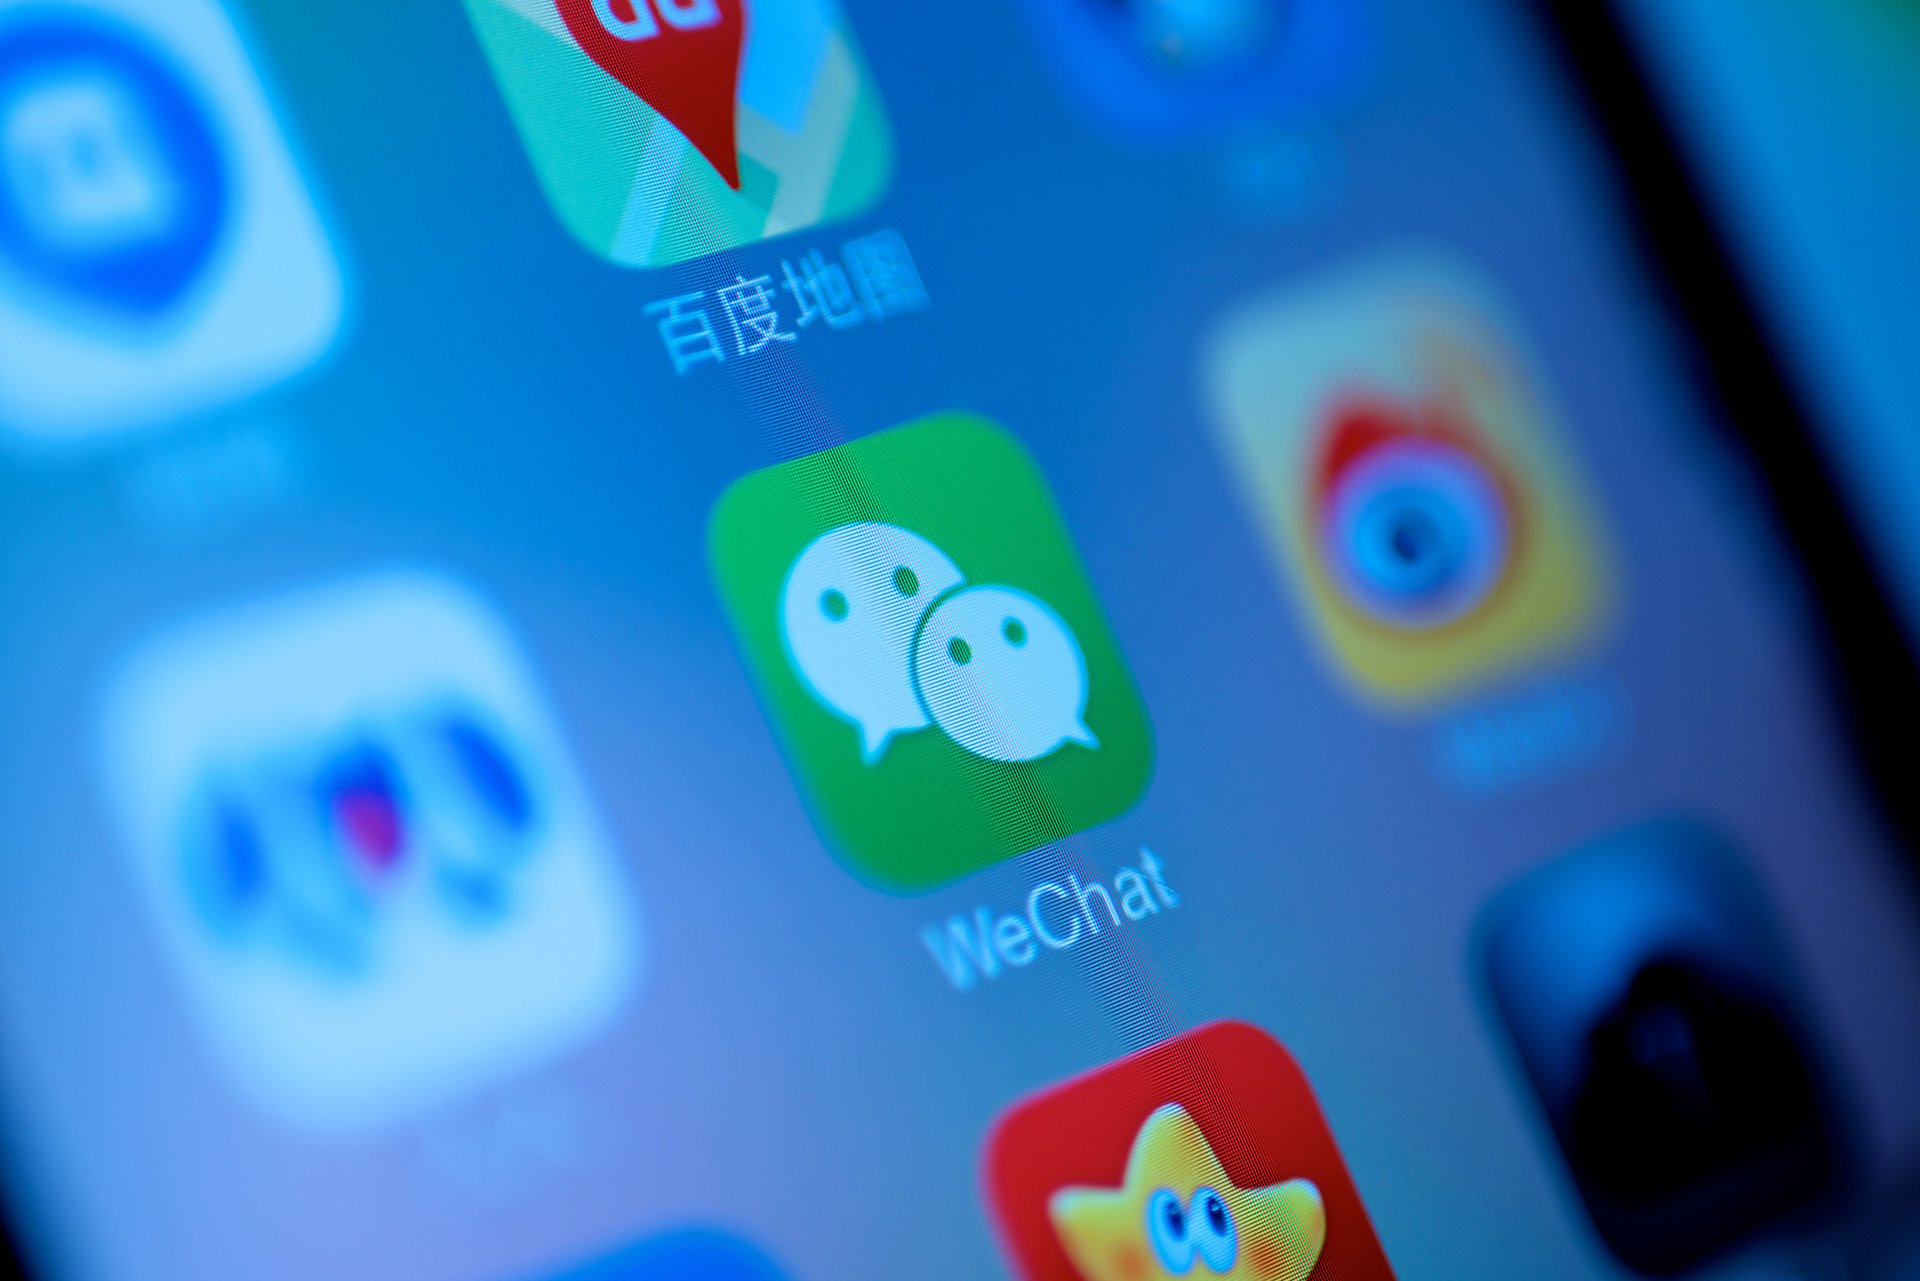 Close up of the WeChat app icon on a mobile phone screen.